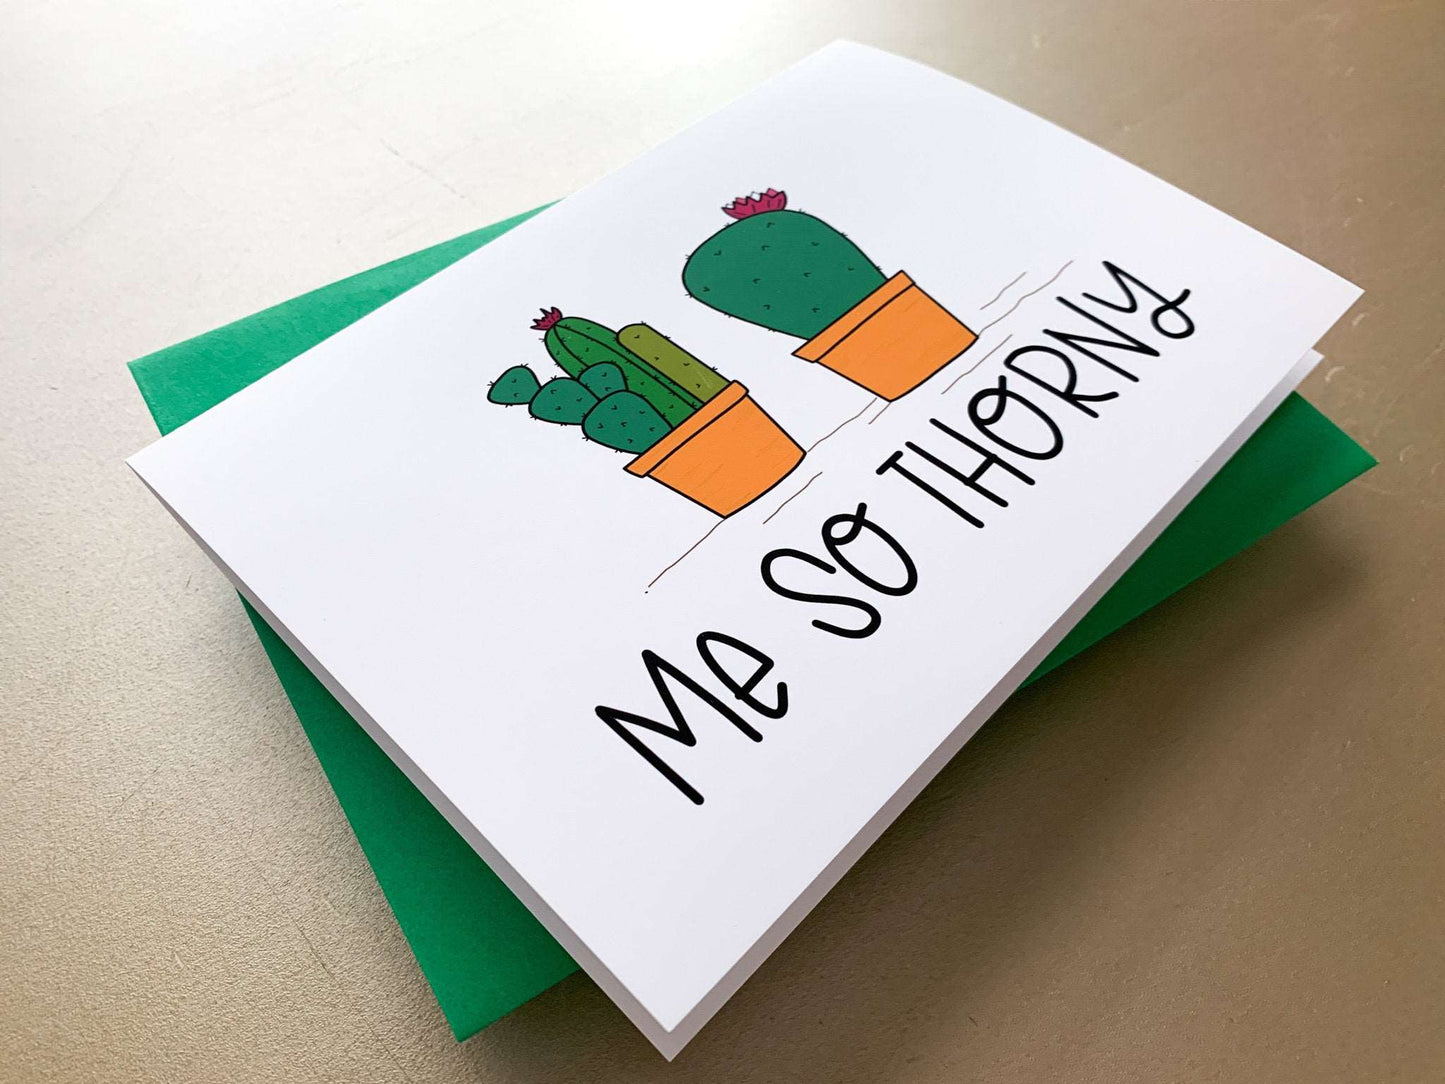 Funny Succulent Me So Thorny Handmade Card by StoneDonut Design